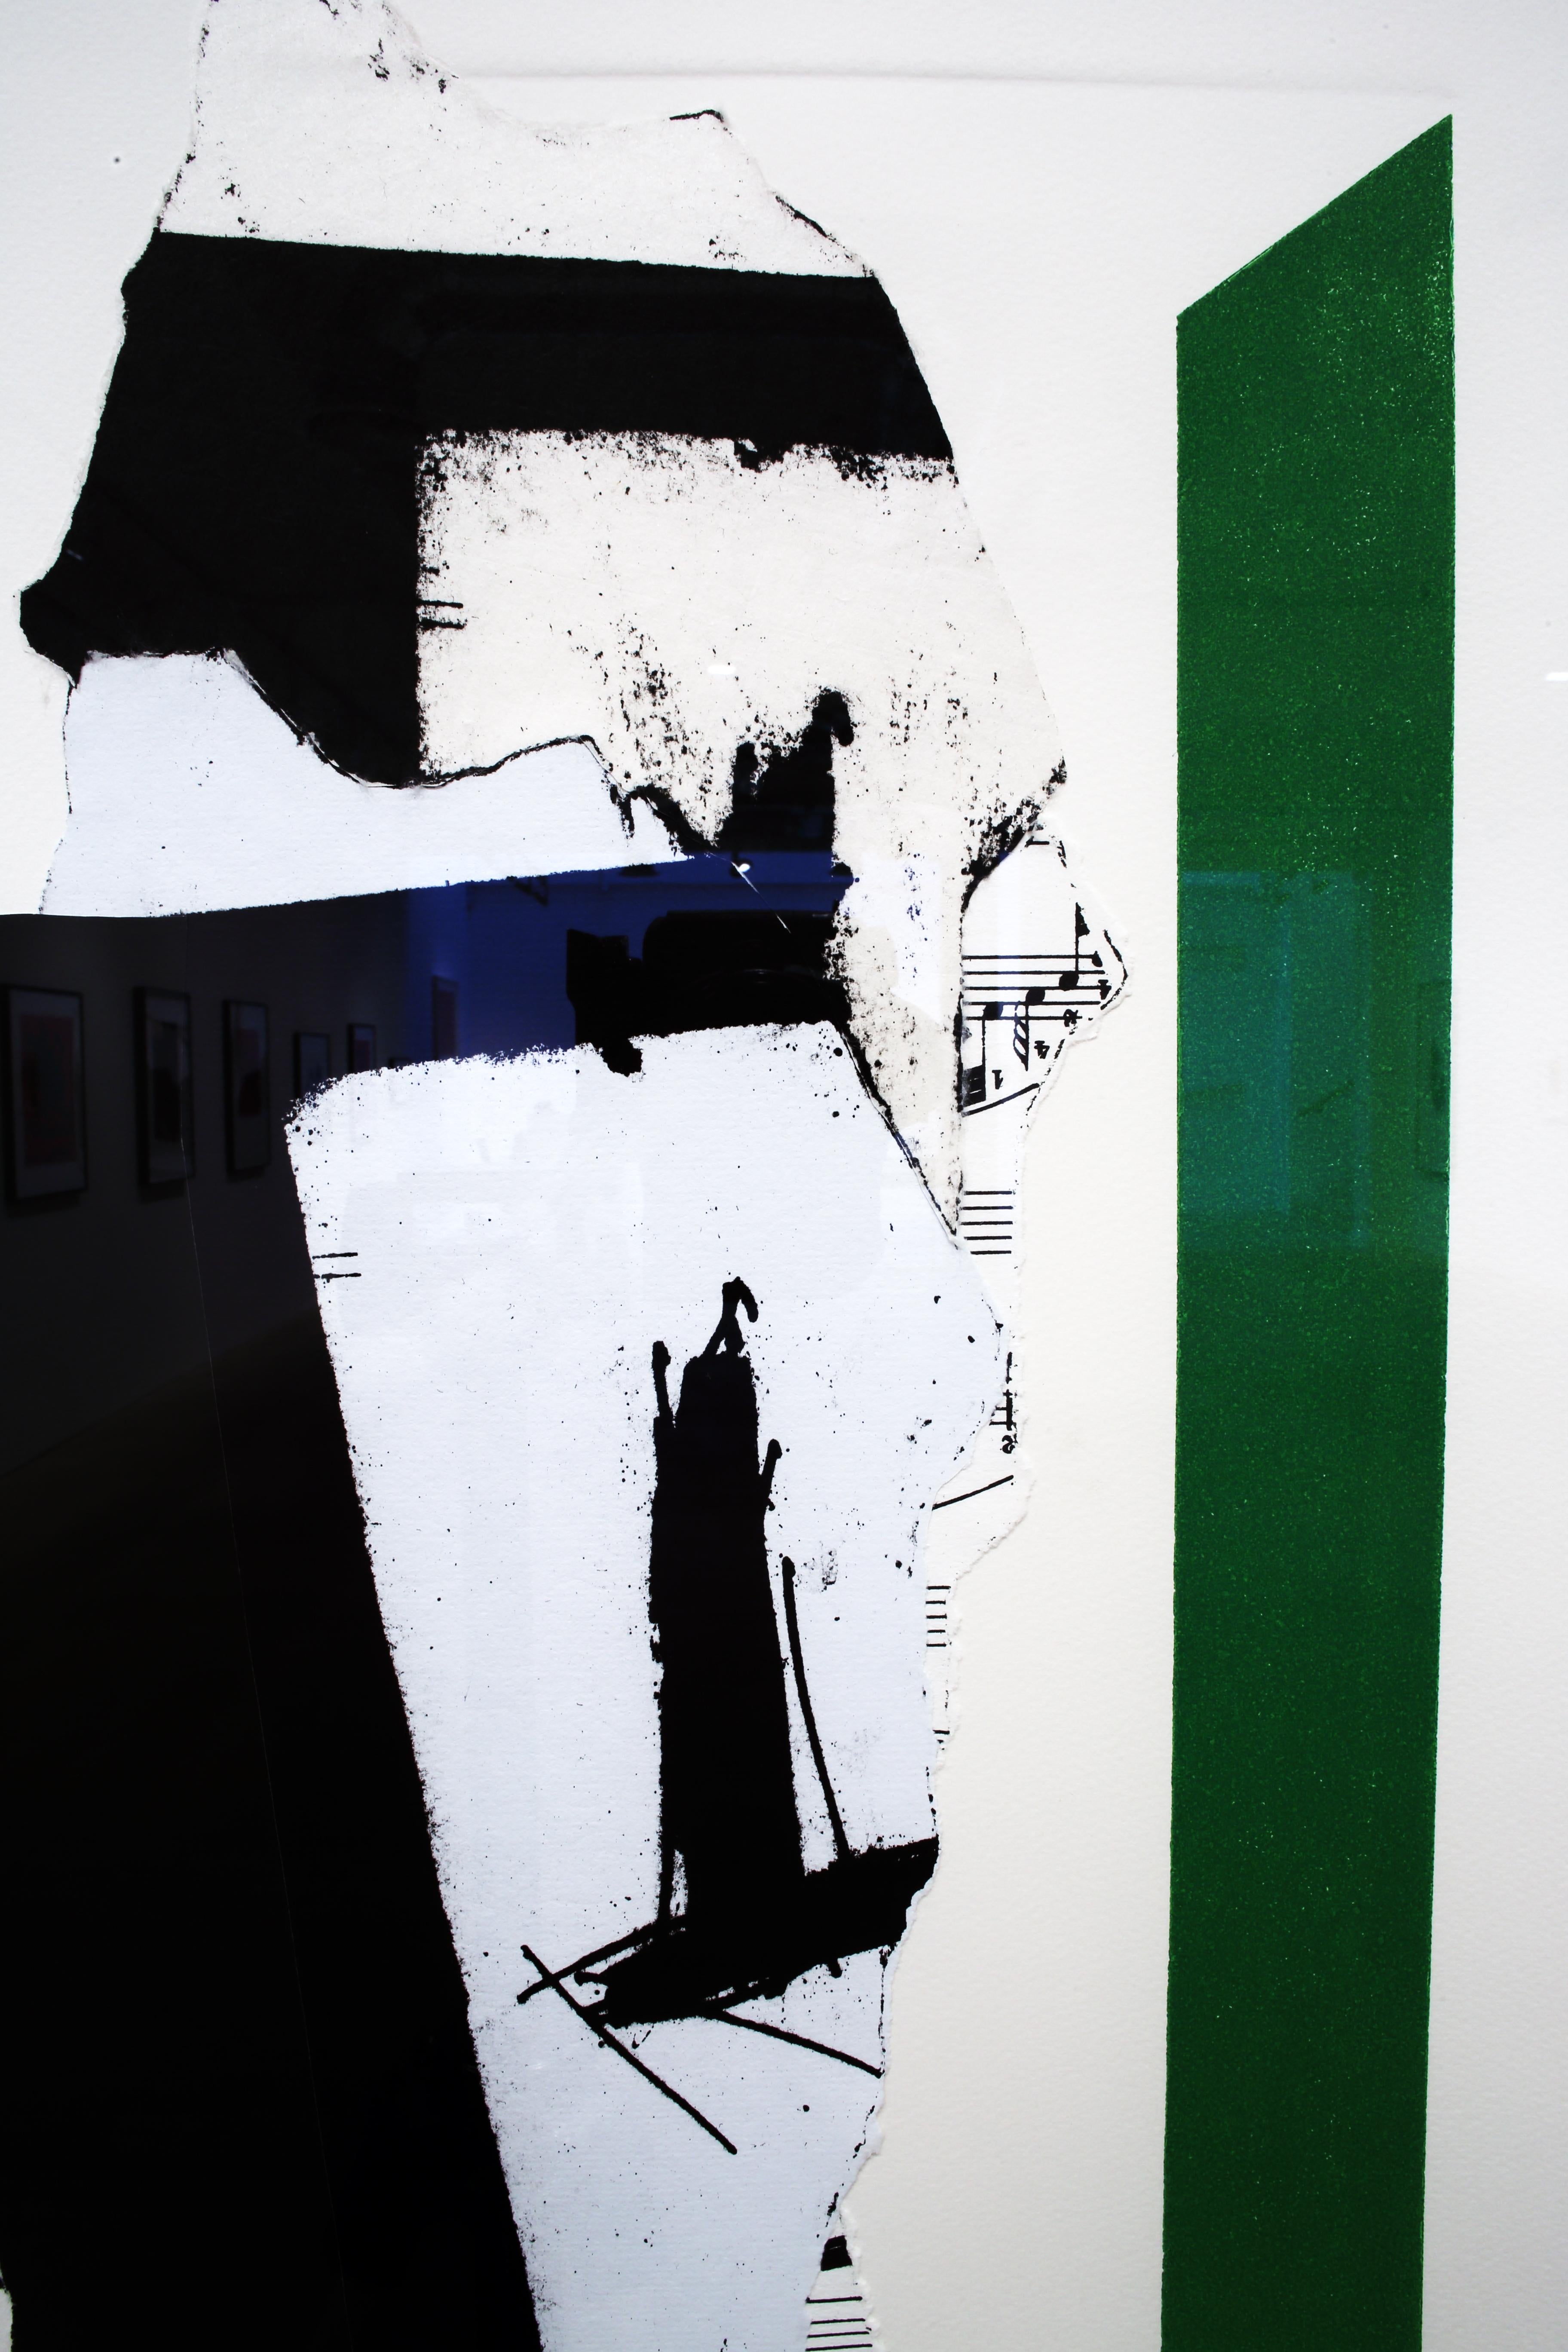 In White with Green Stripe - Abstract Expressionist Print by Robert Motherwell